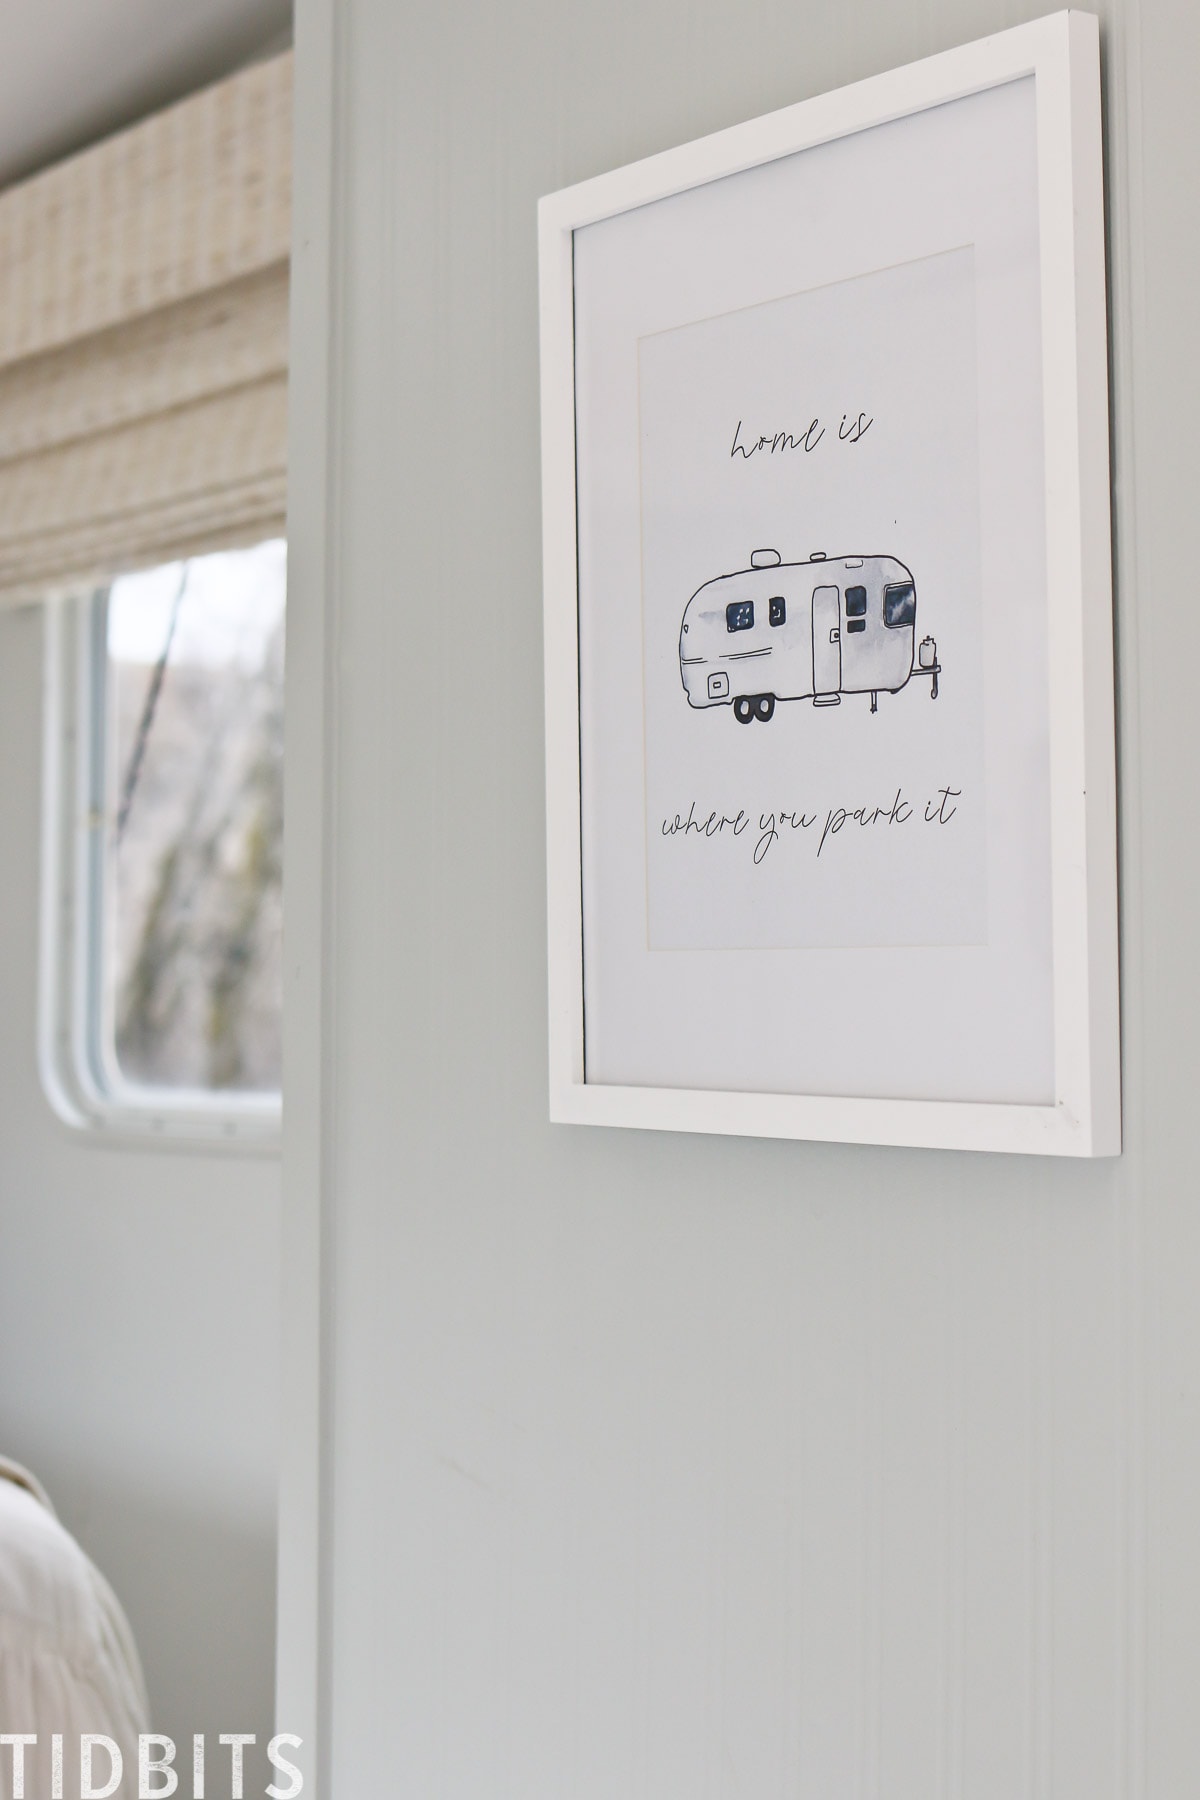 RV Art | Home is where you park it FREE Printable pack